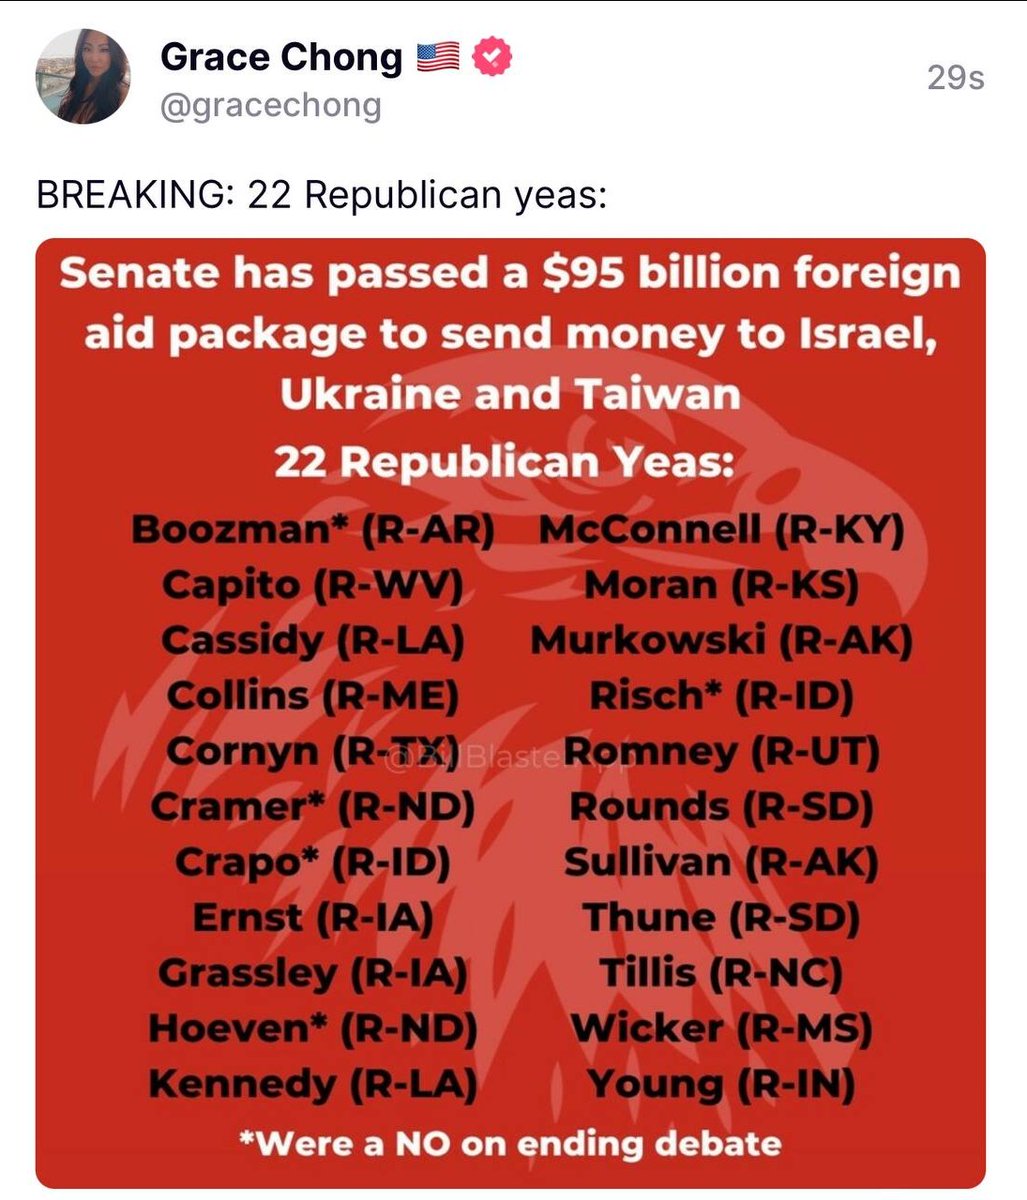 All need to go. They are NOT representing their constituents, the AMERICAN people. They need to be primaried. Shame on these Senators.